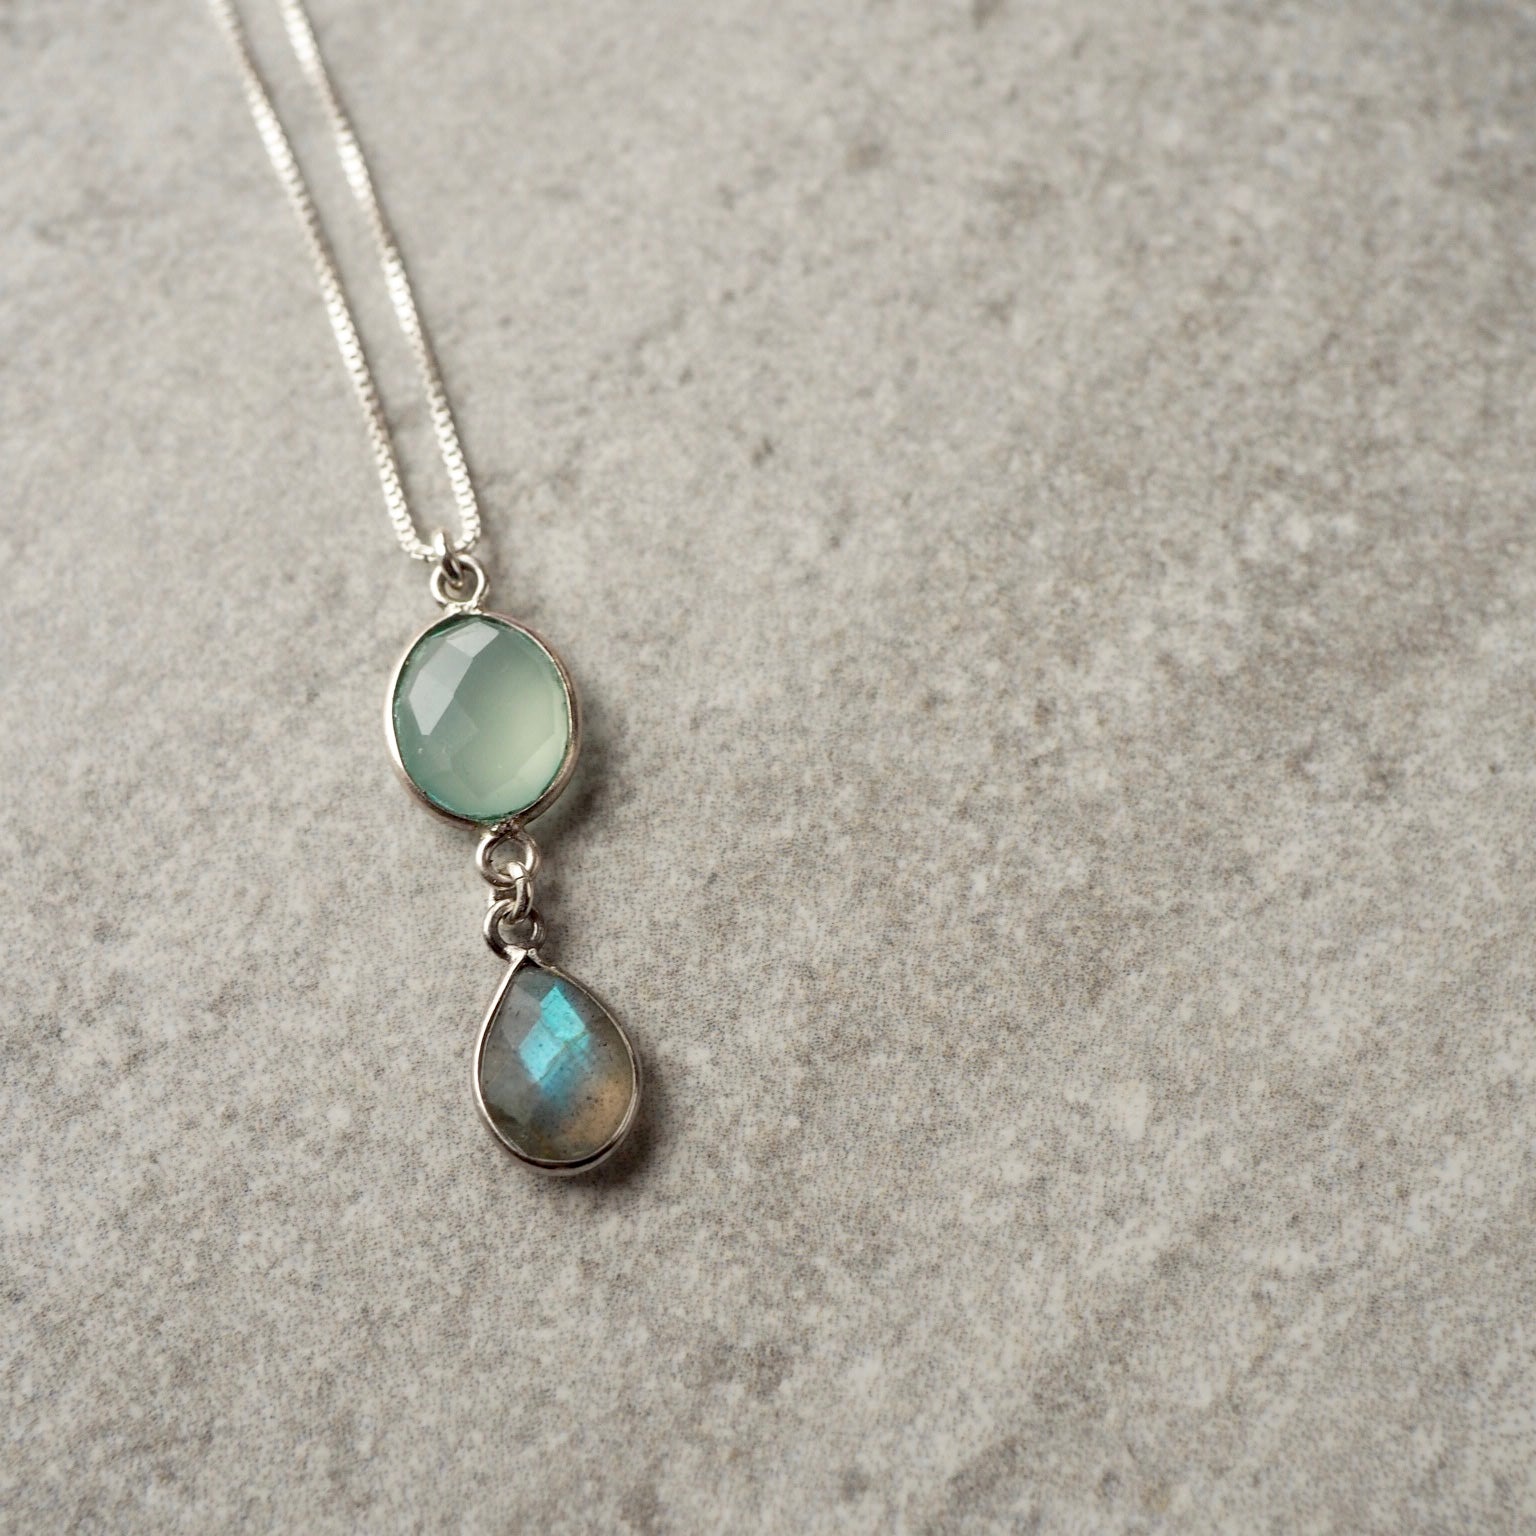 Gemstone Necklace with Chalcedony and Labradorite